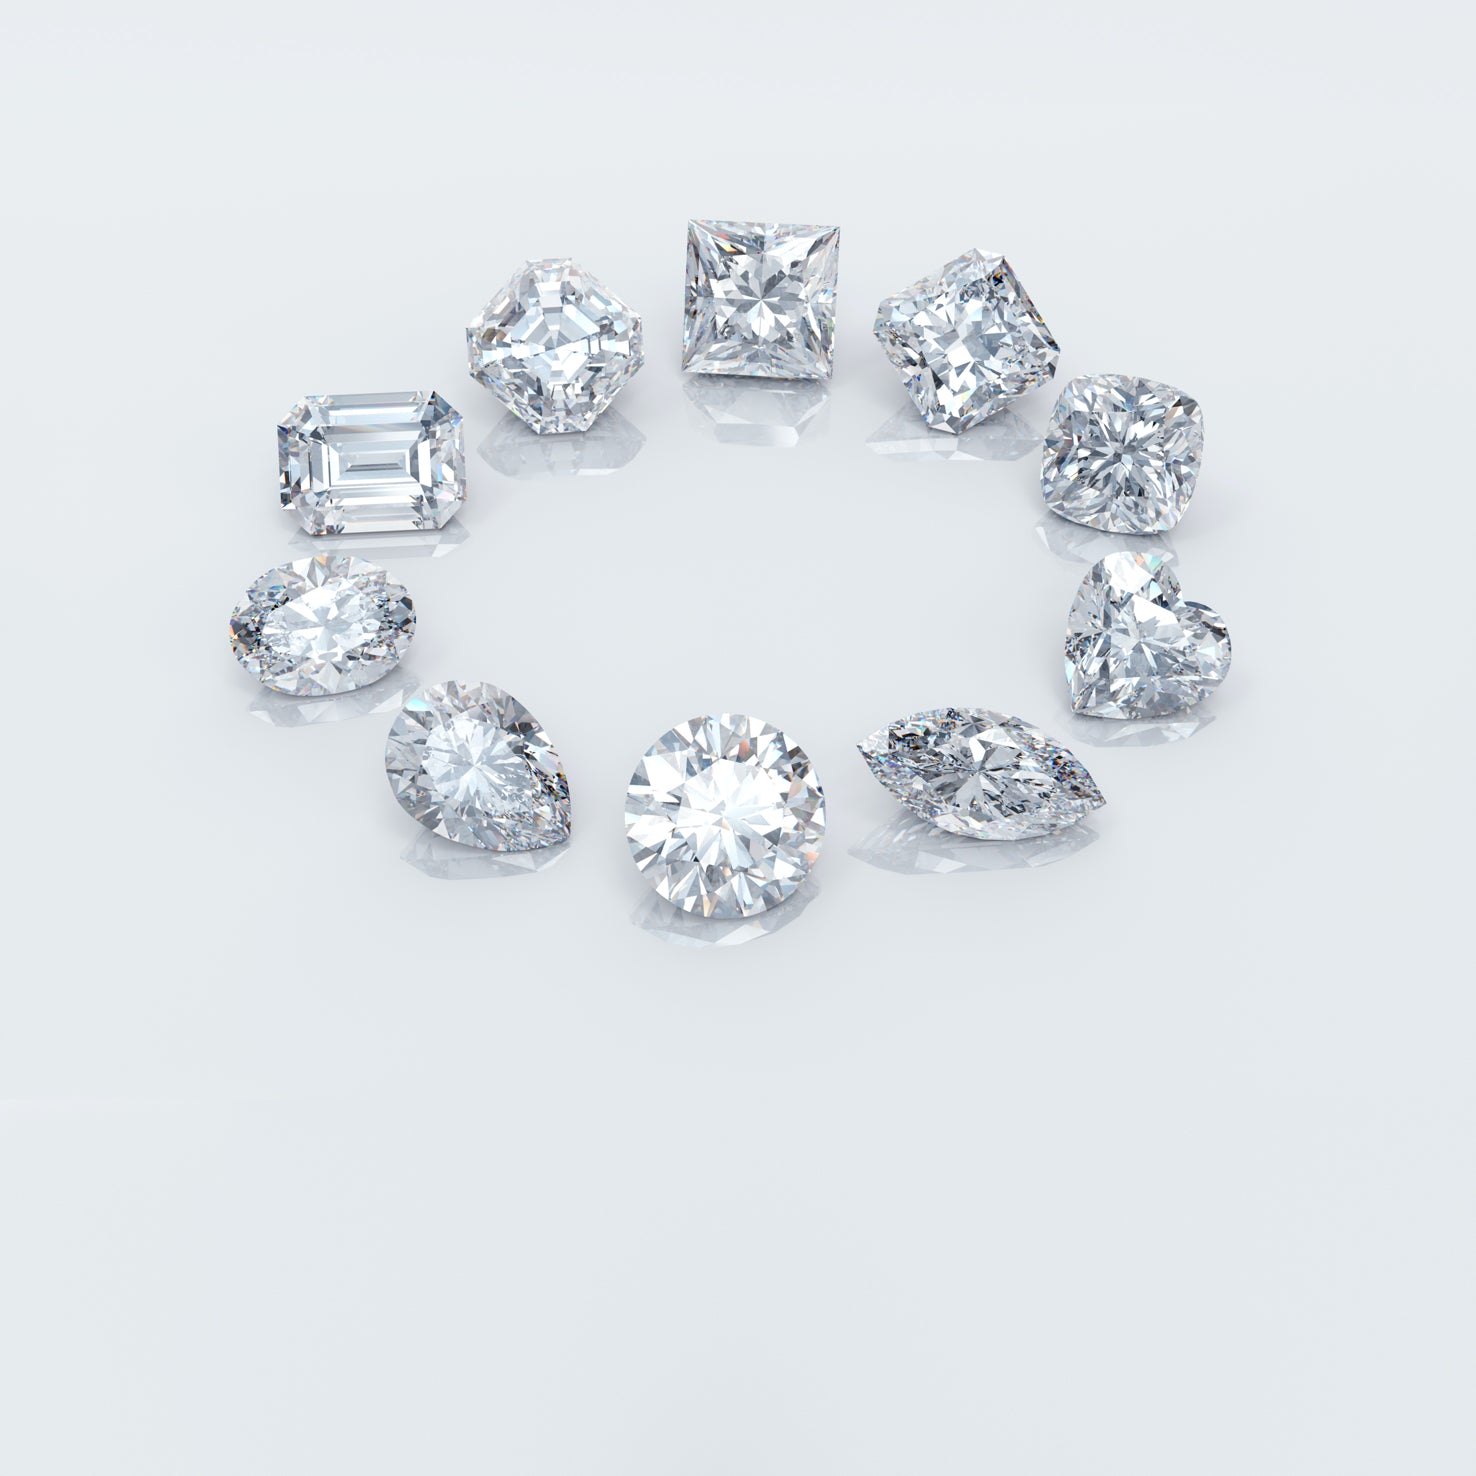 Picture on ideal cut lab grown diamonds in different shapes.